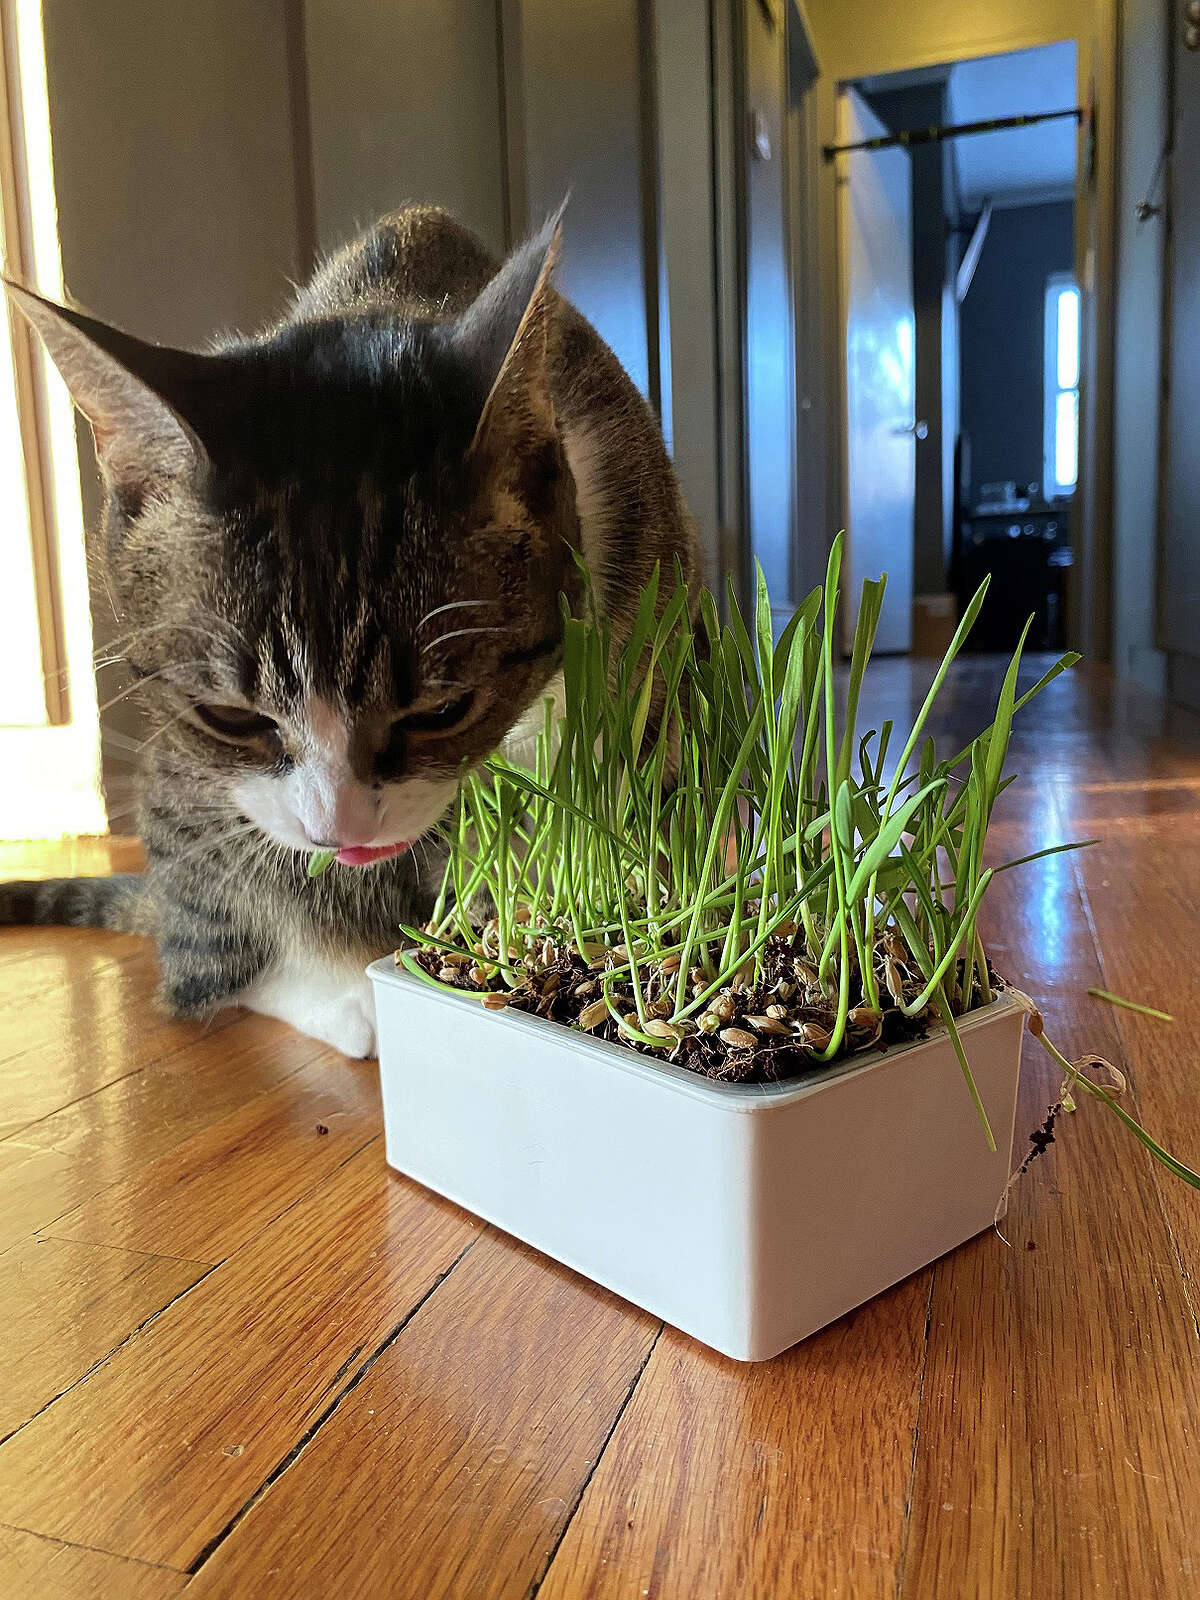 Cat grass kits are easy to grow and provide fresh, healthy wheatgrass, oat grass or ryegrass for cats to nibble on instead of your plants.